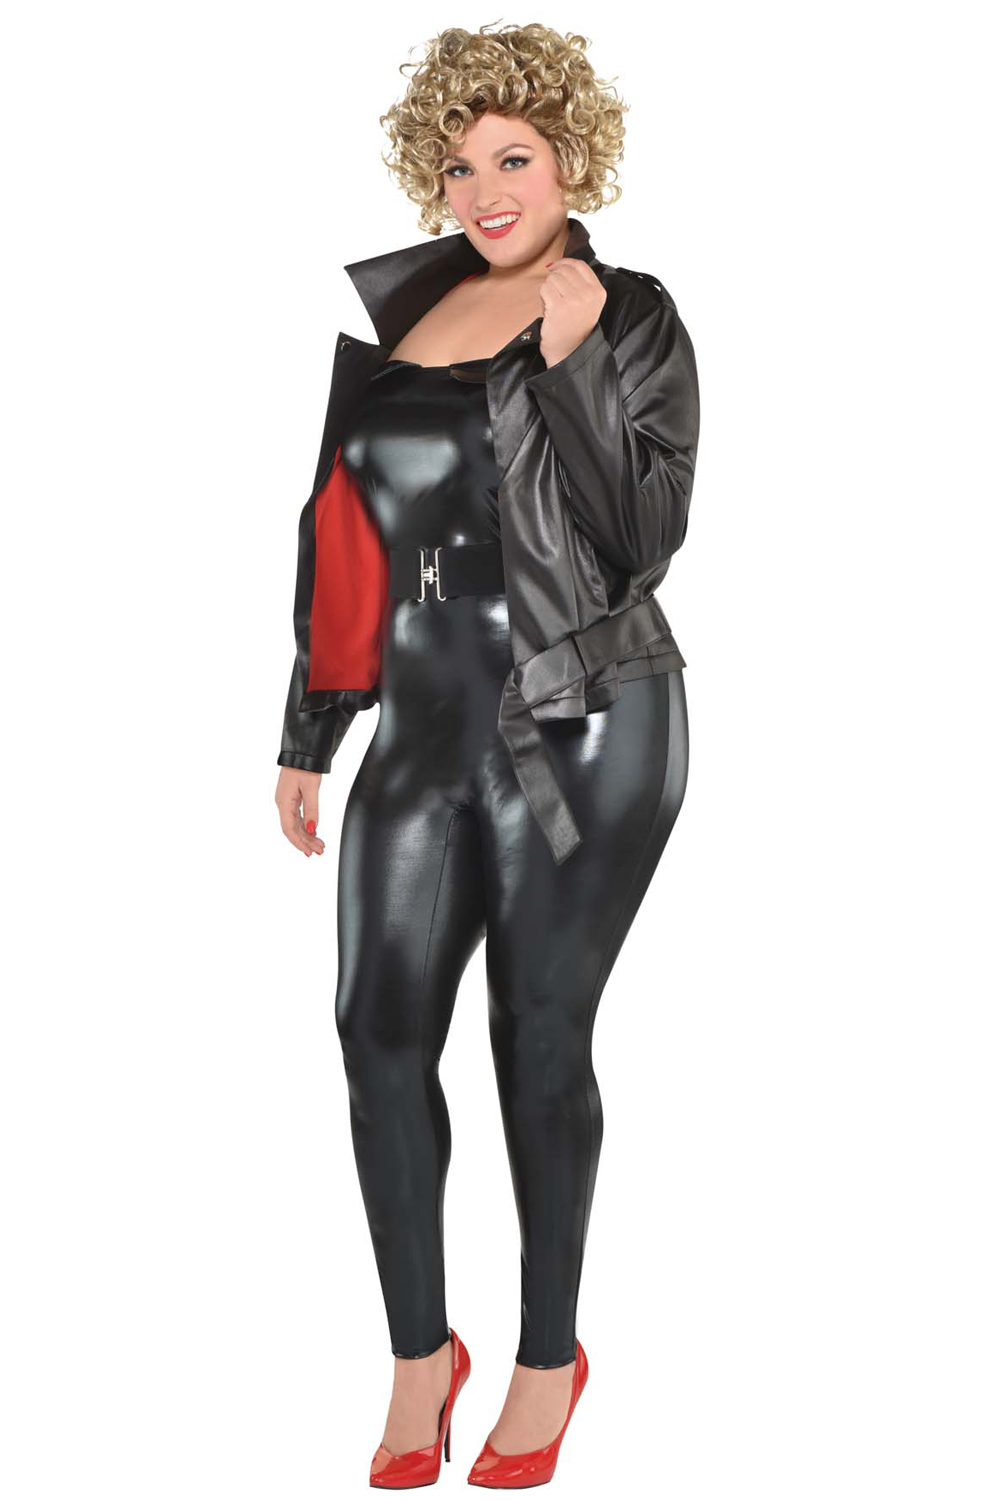 Grease Greaser Sandy Plus Size Costume - image 1 of 2